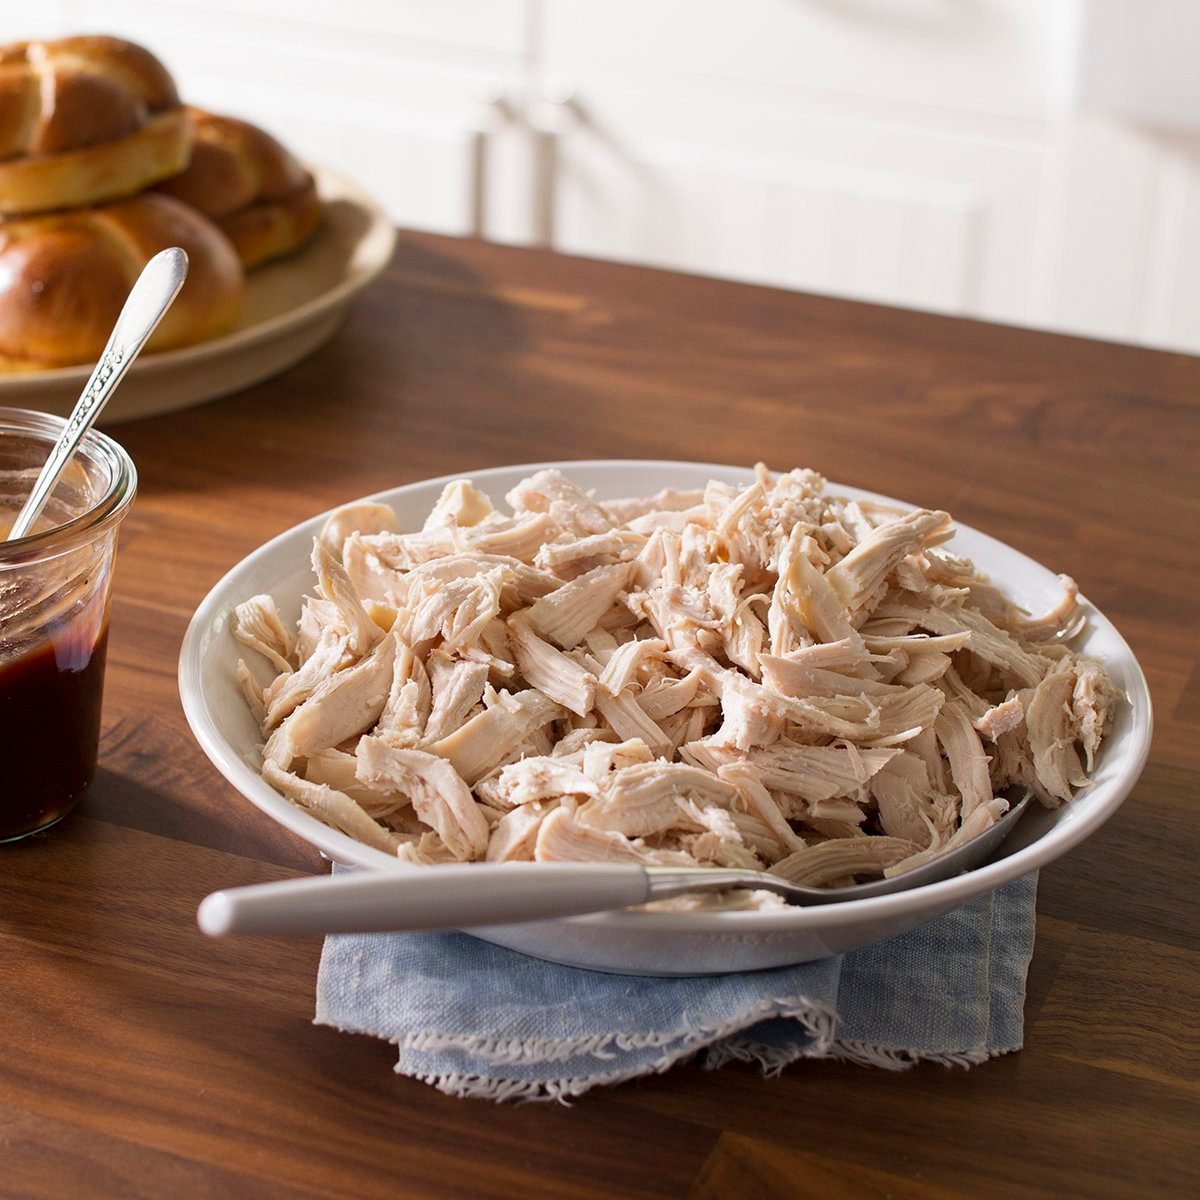 A white plate filled with shredded chicken on a wooden table beside a plate of buns and jar of gravy